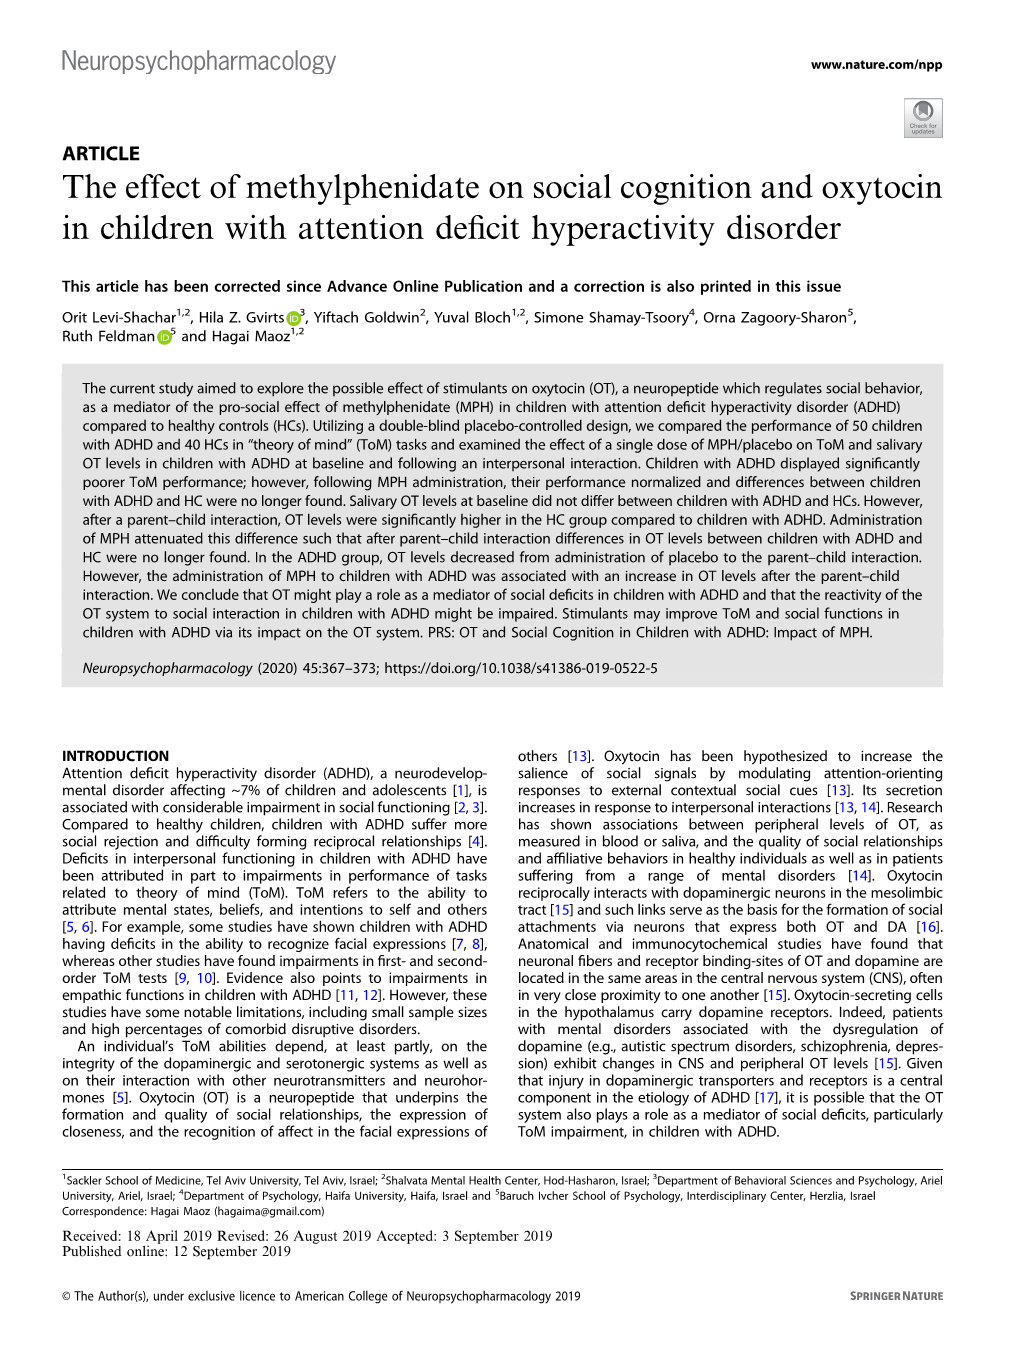 The Effect of Methylphenidate on Social Cognition and Oxytocin in Children with Attention Deﬁcit Hyperactivity Disorder